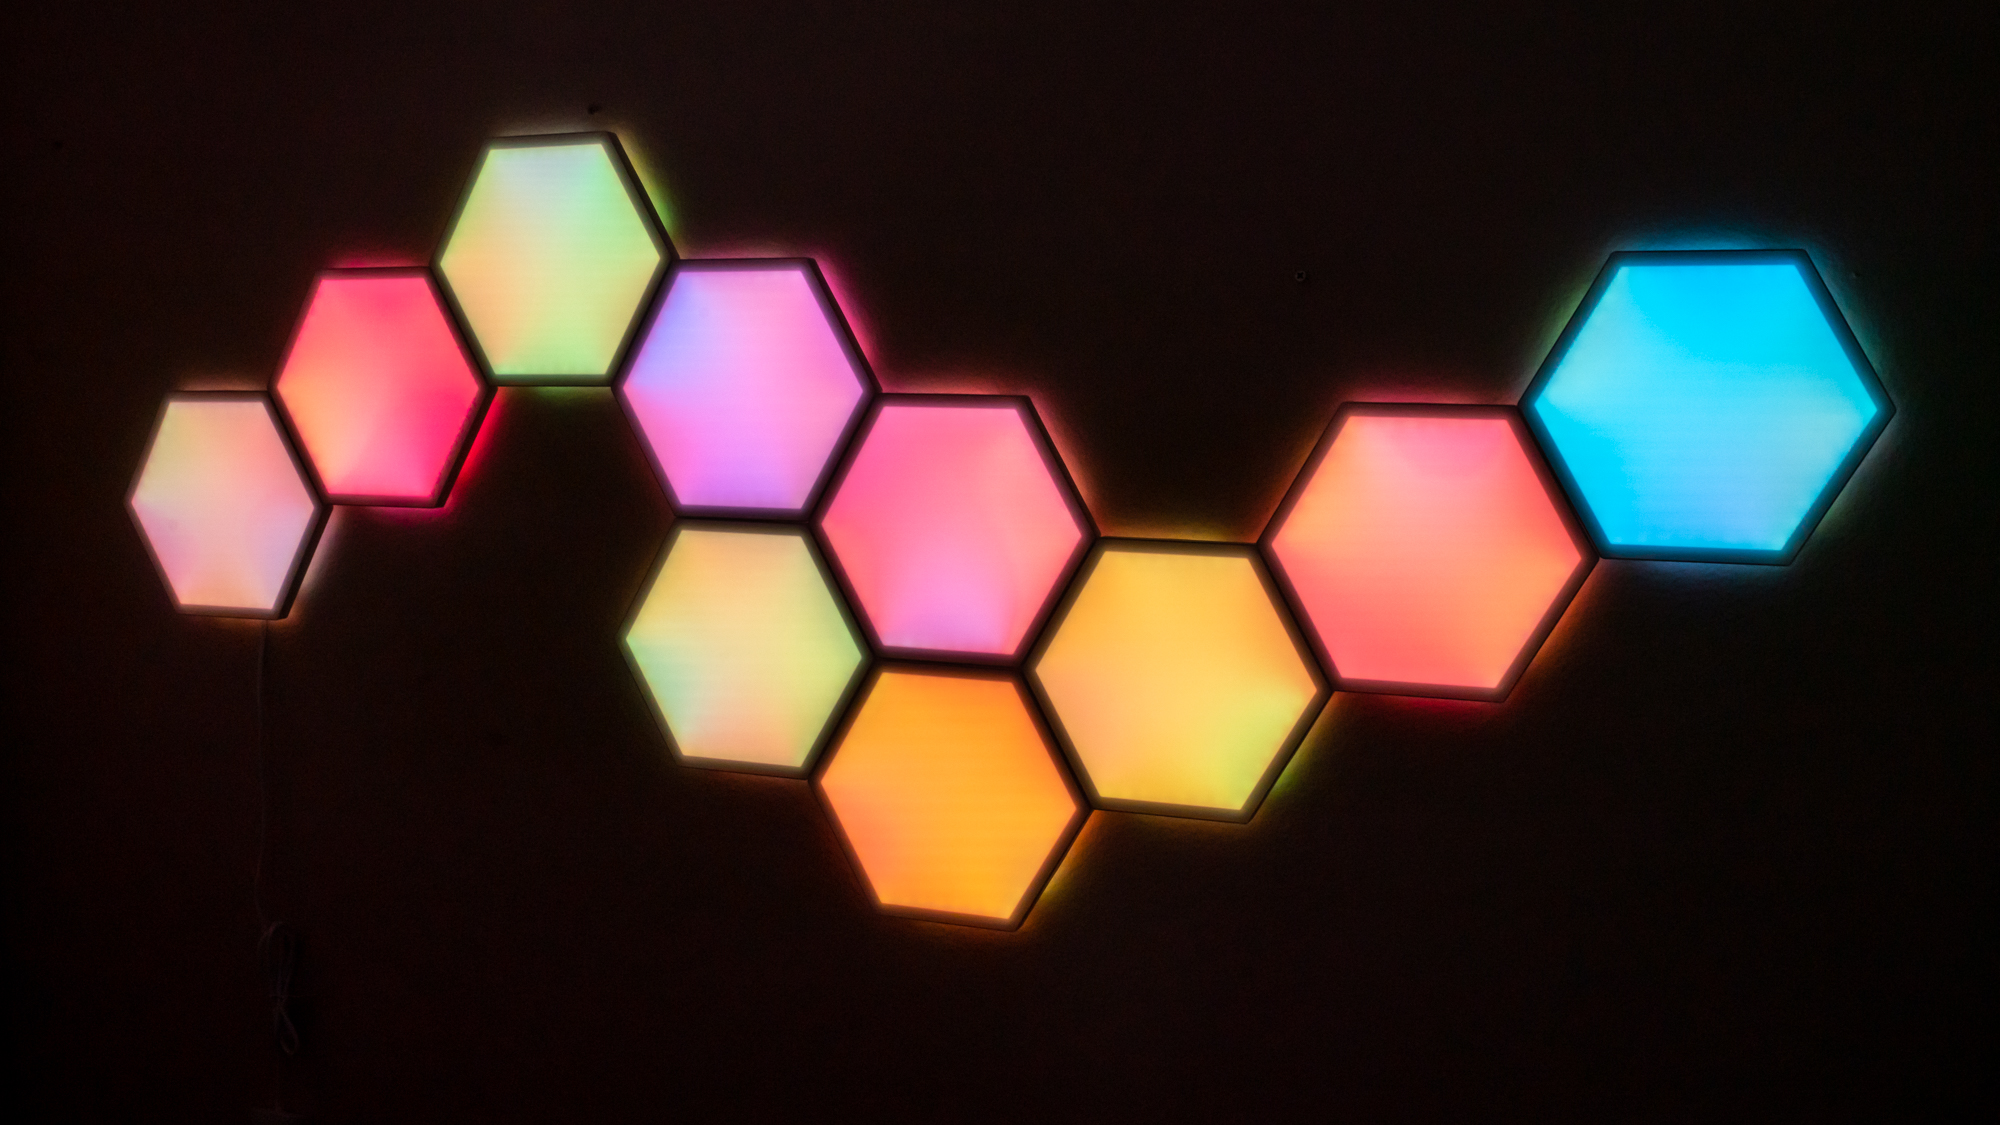 Govee Flow Pro Review: Colorful Reactive Smart Lighting